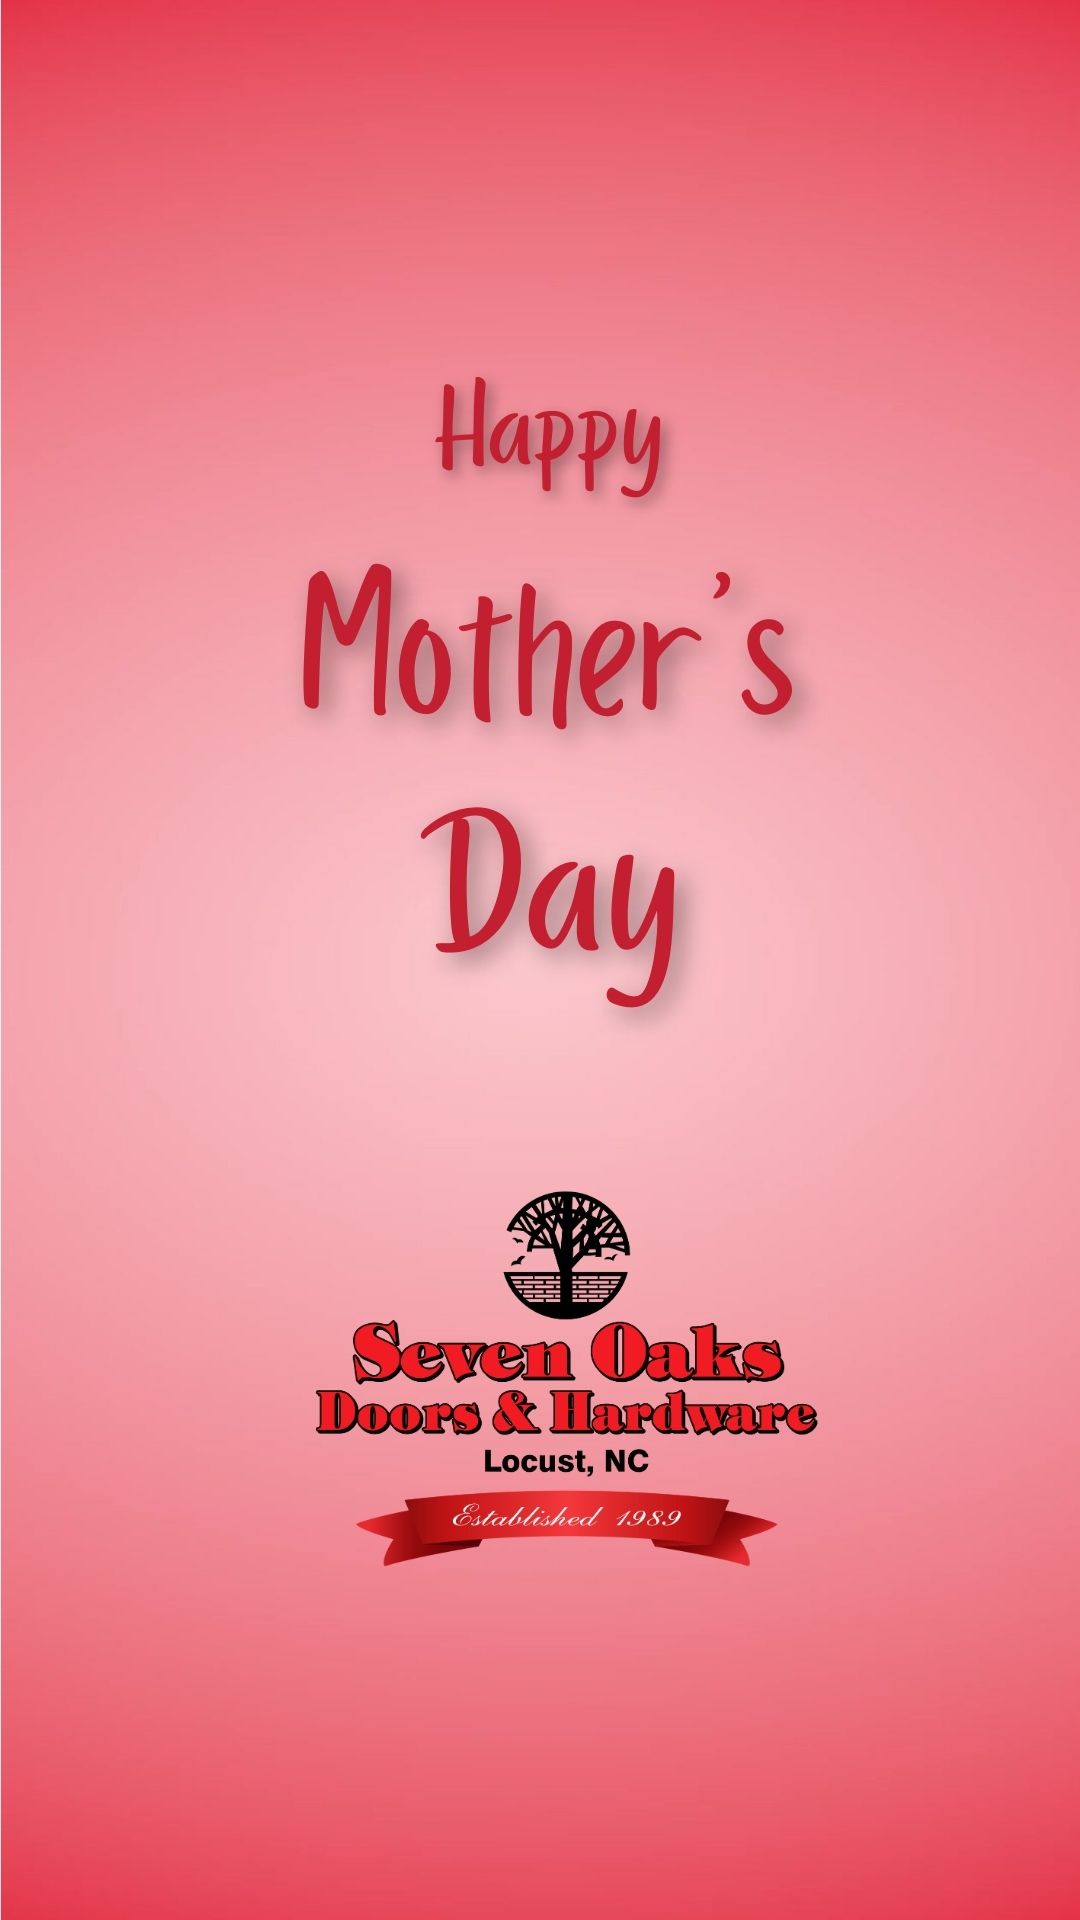 Happy Mother’s Day from Seven Oaks!